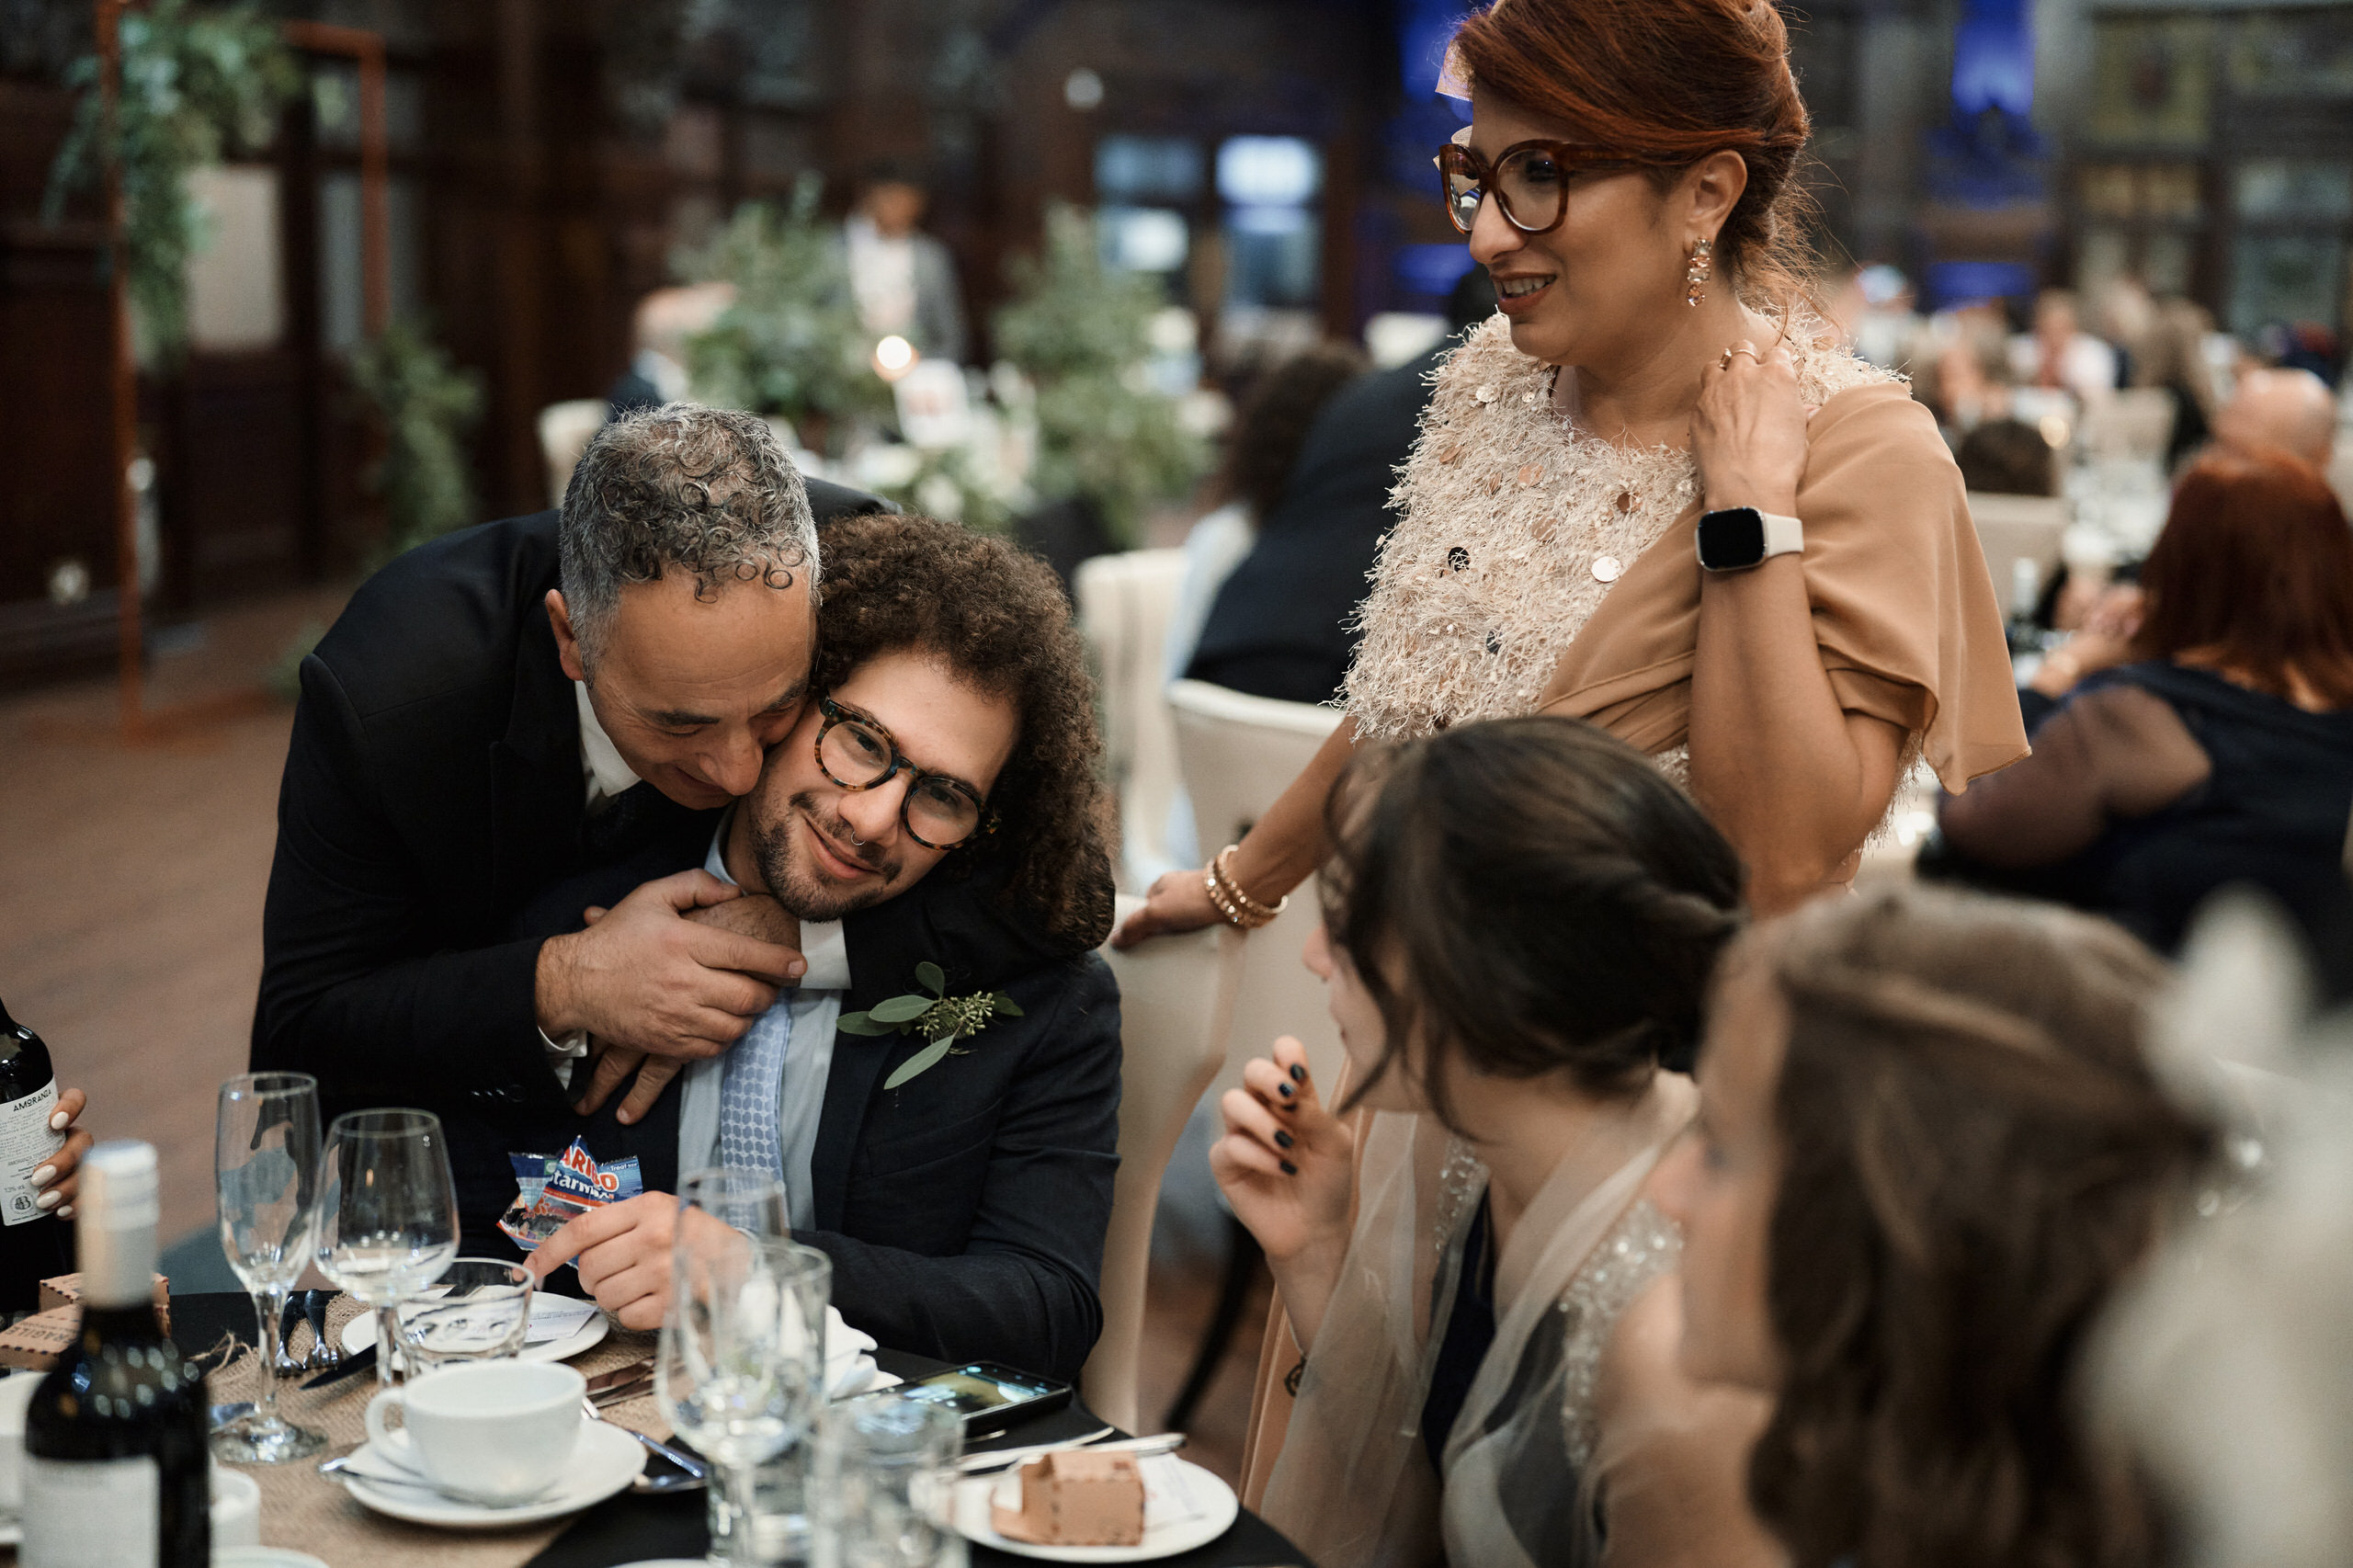 A guy is giving a lady a hug at a wedding party.